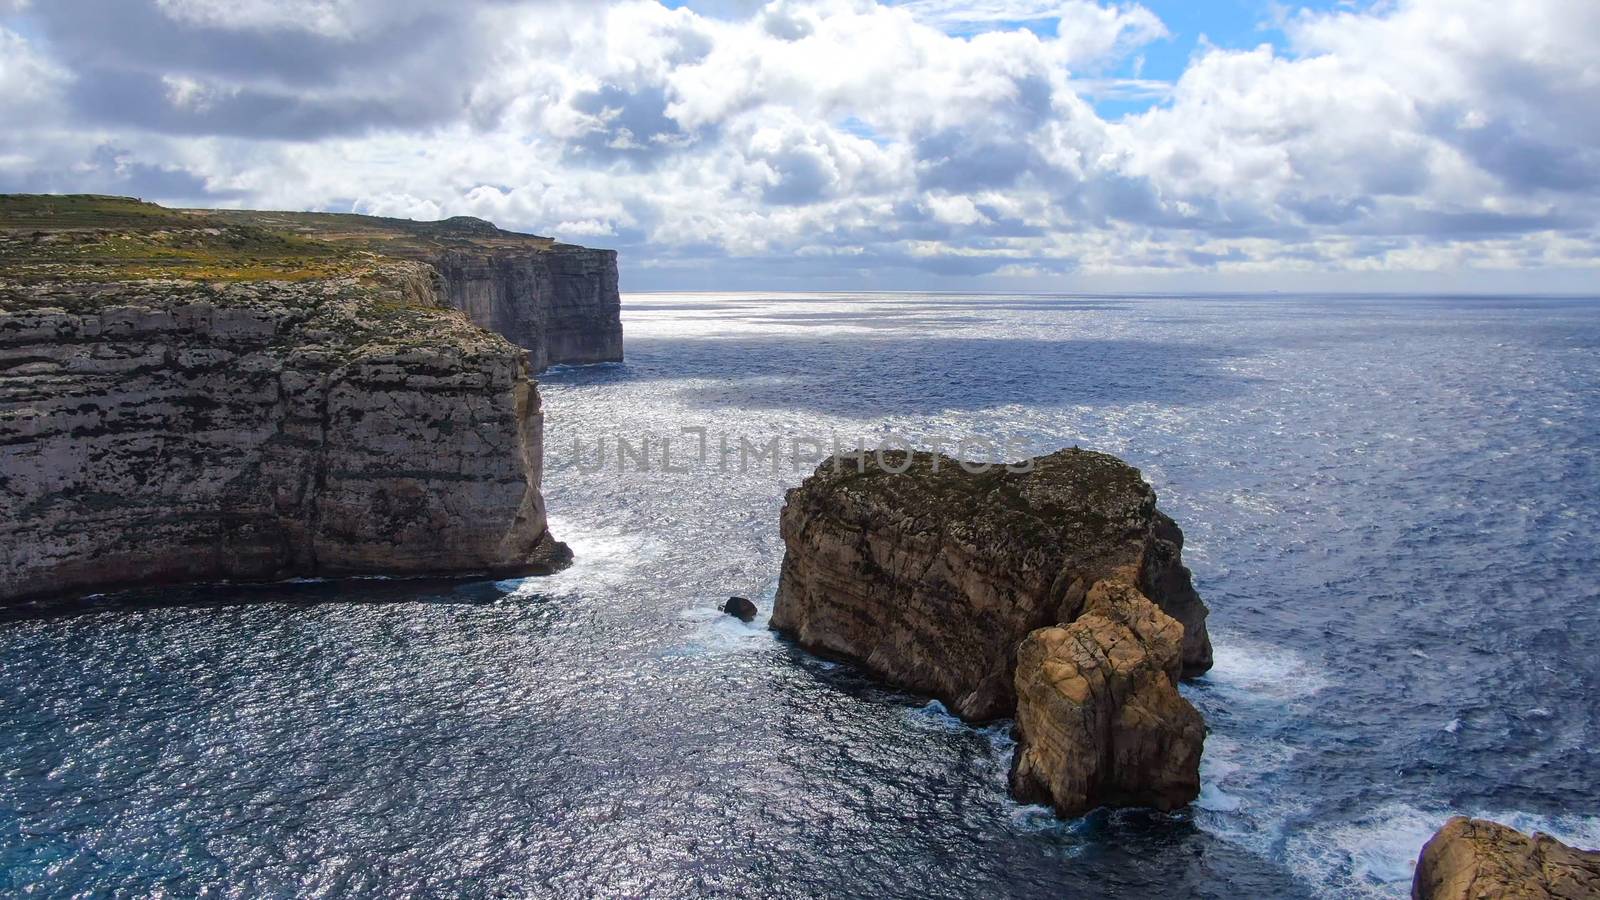 The remains of Azure Window at Dwerja Bay at the coast of Gozo Malta by Lattwein